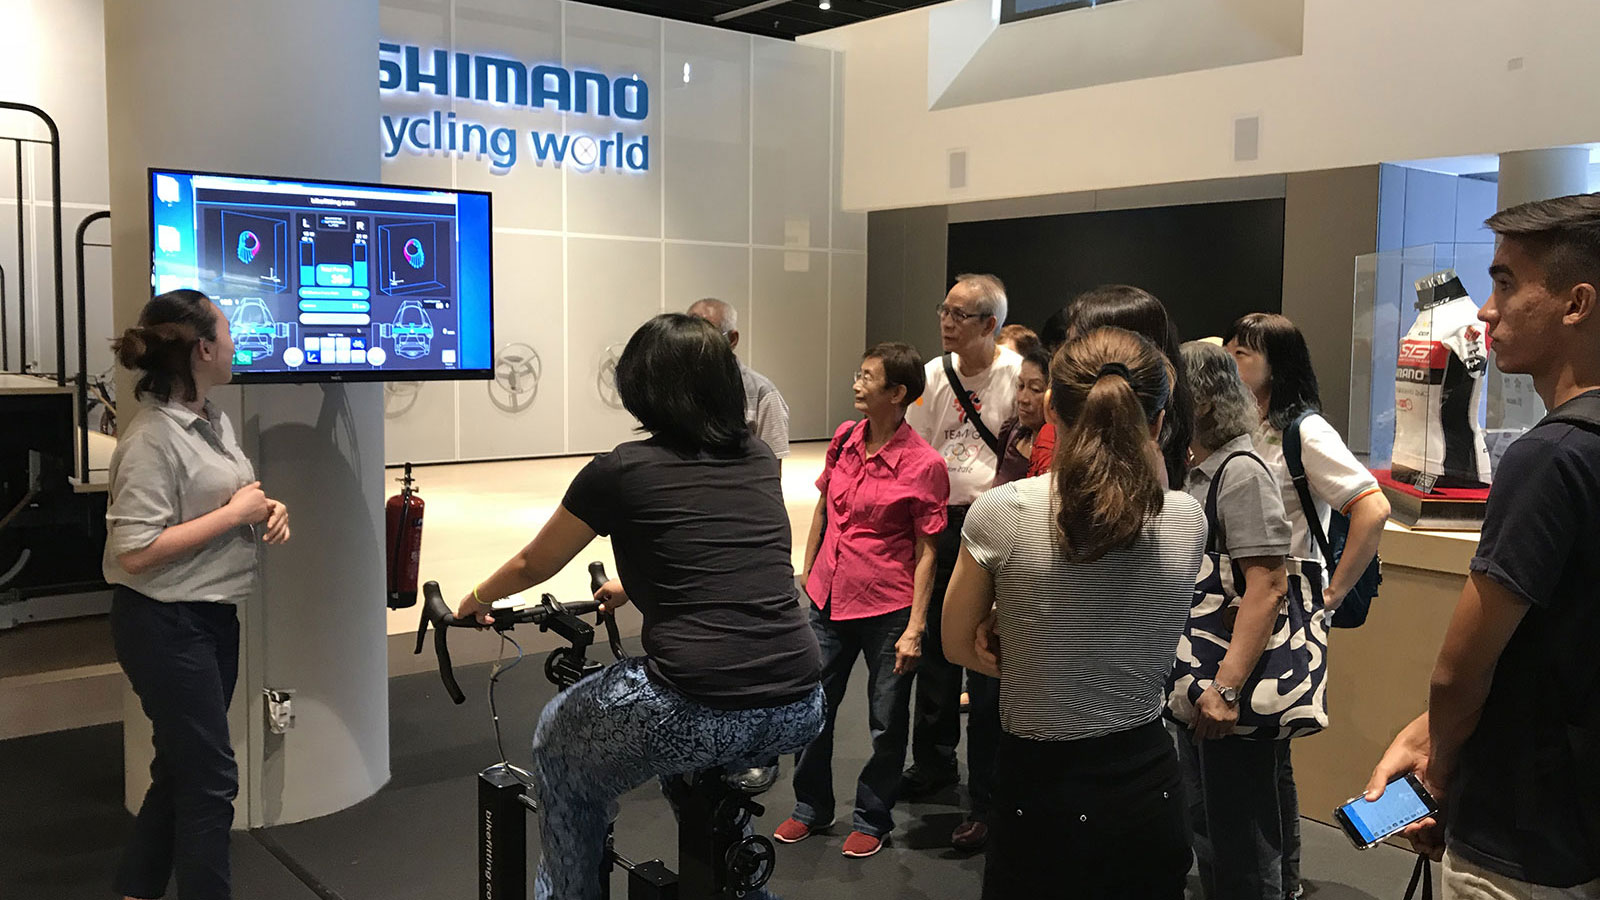 Beneficiaries witnessed the technological advancements bicycles have undergone at Shimano Cycling World